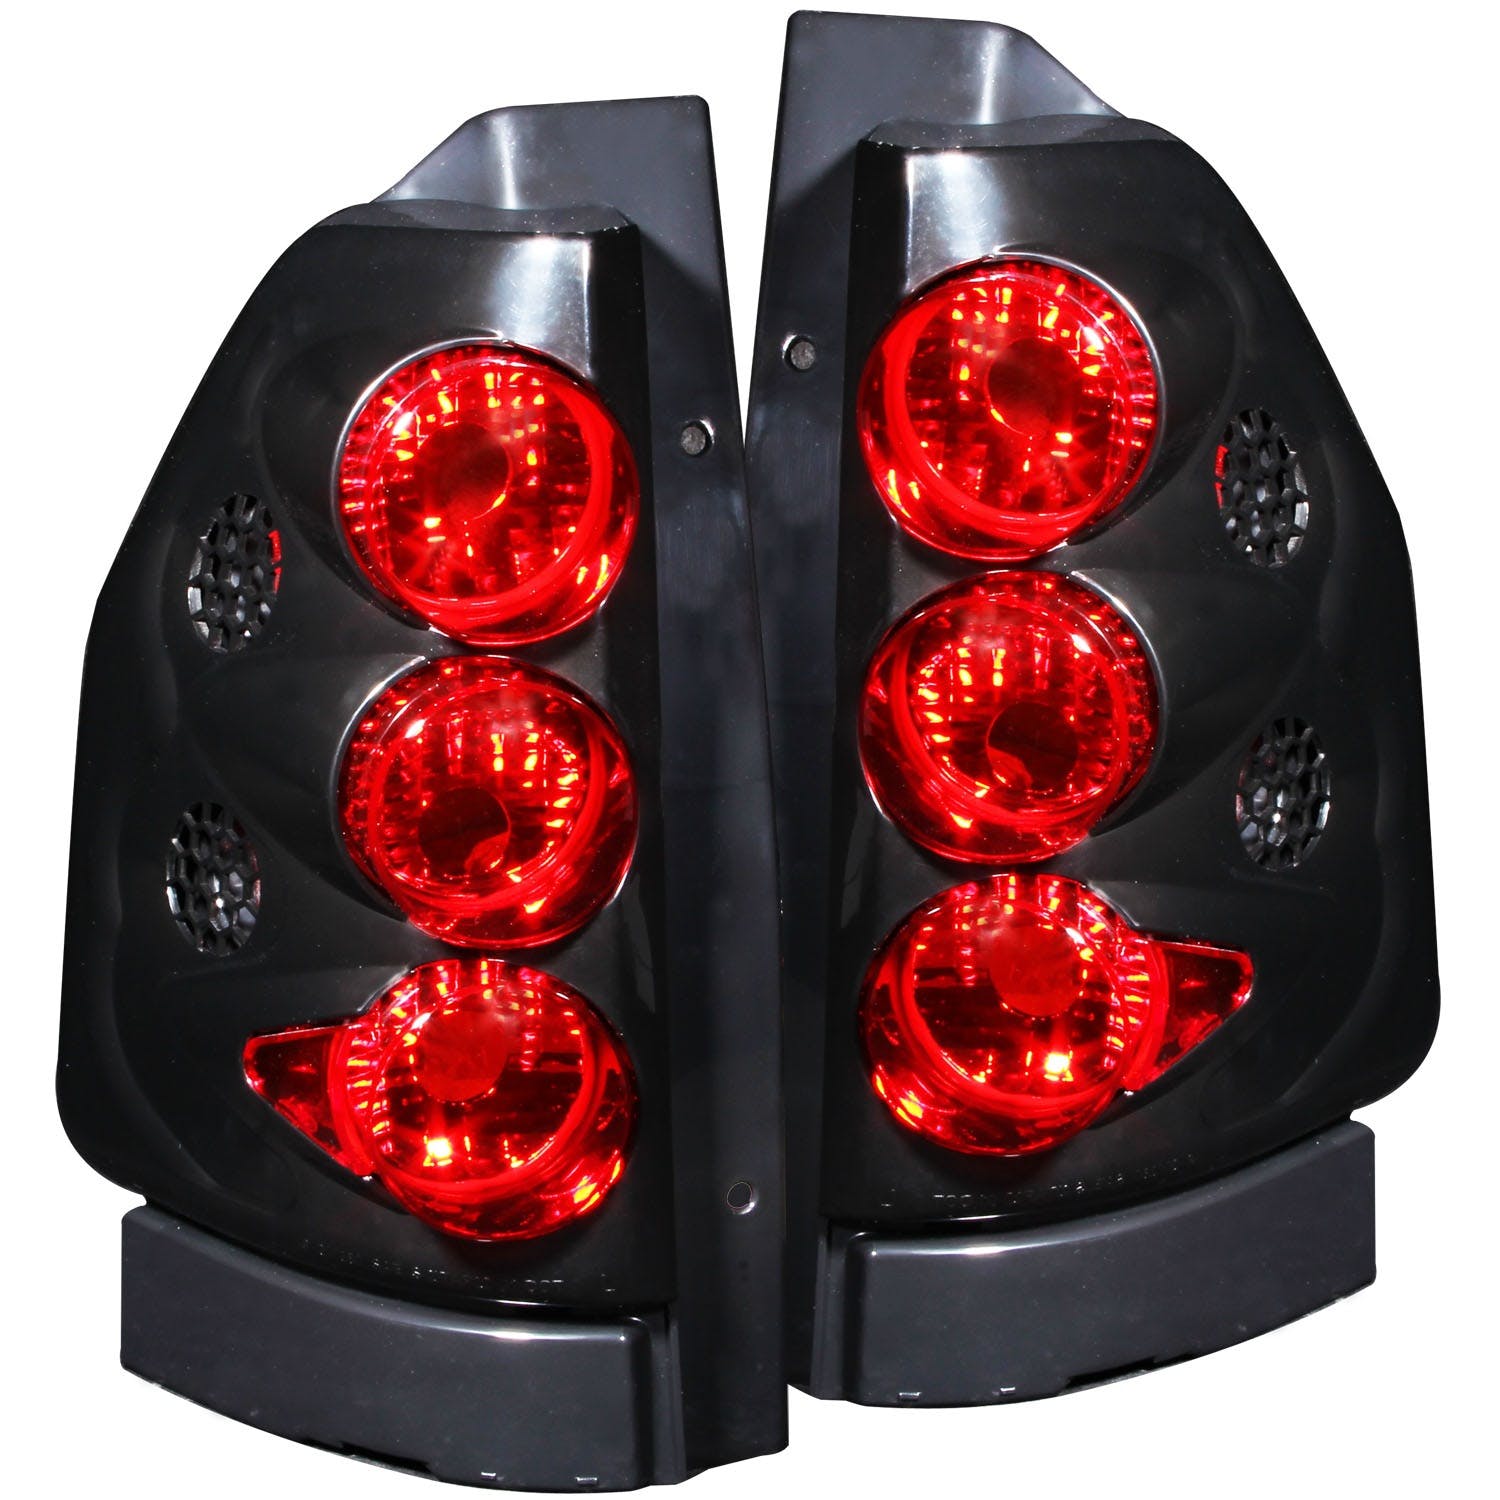 AnzoUSA 211093 Taillights Black